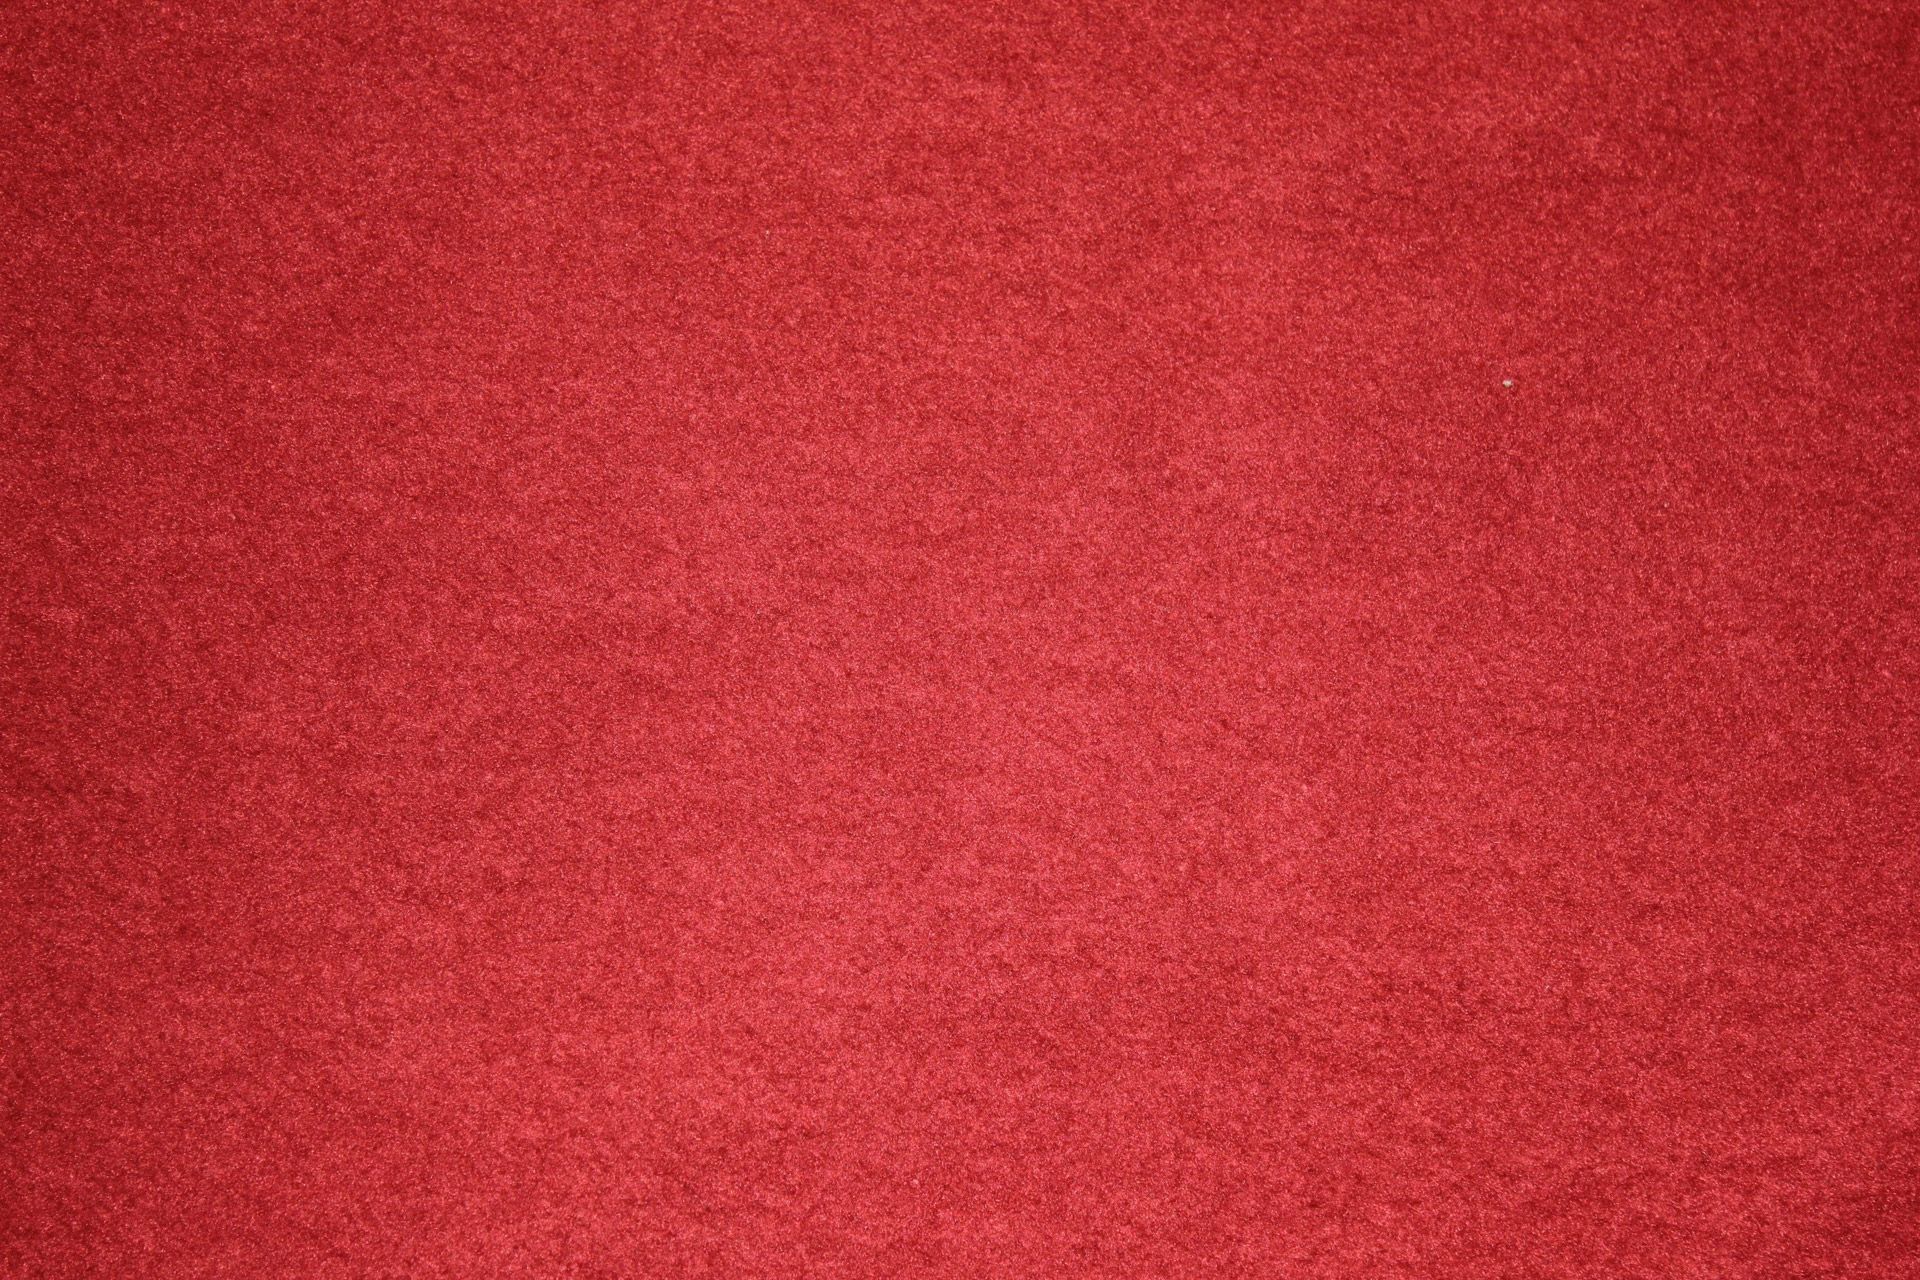 Red Texture Wallpapers Free For Desktop Wallpaper 1920 x 1280 px